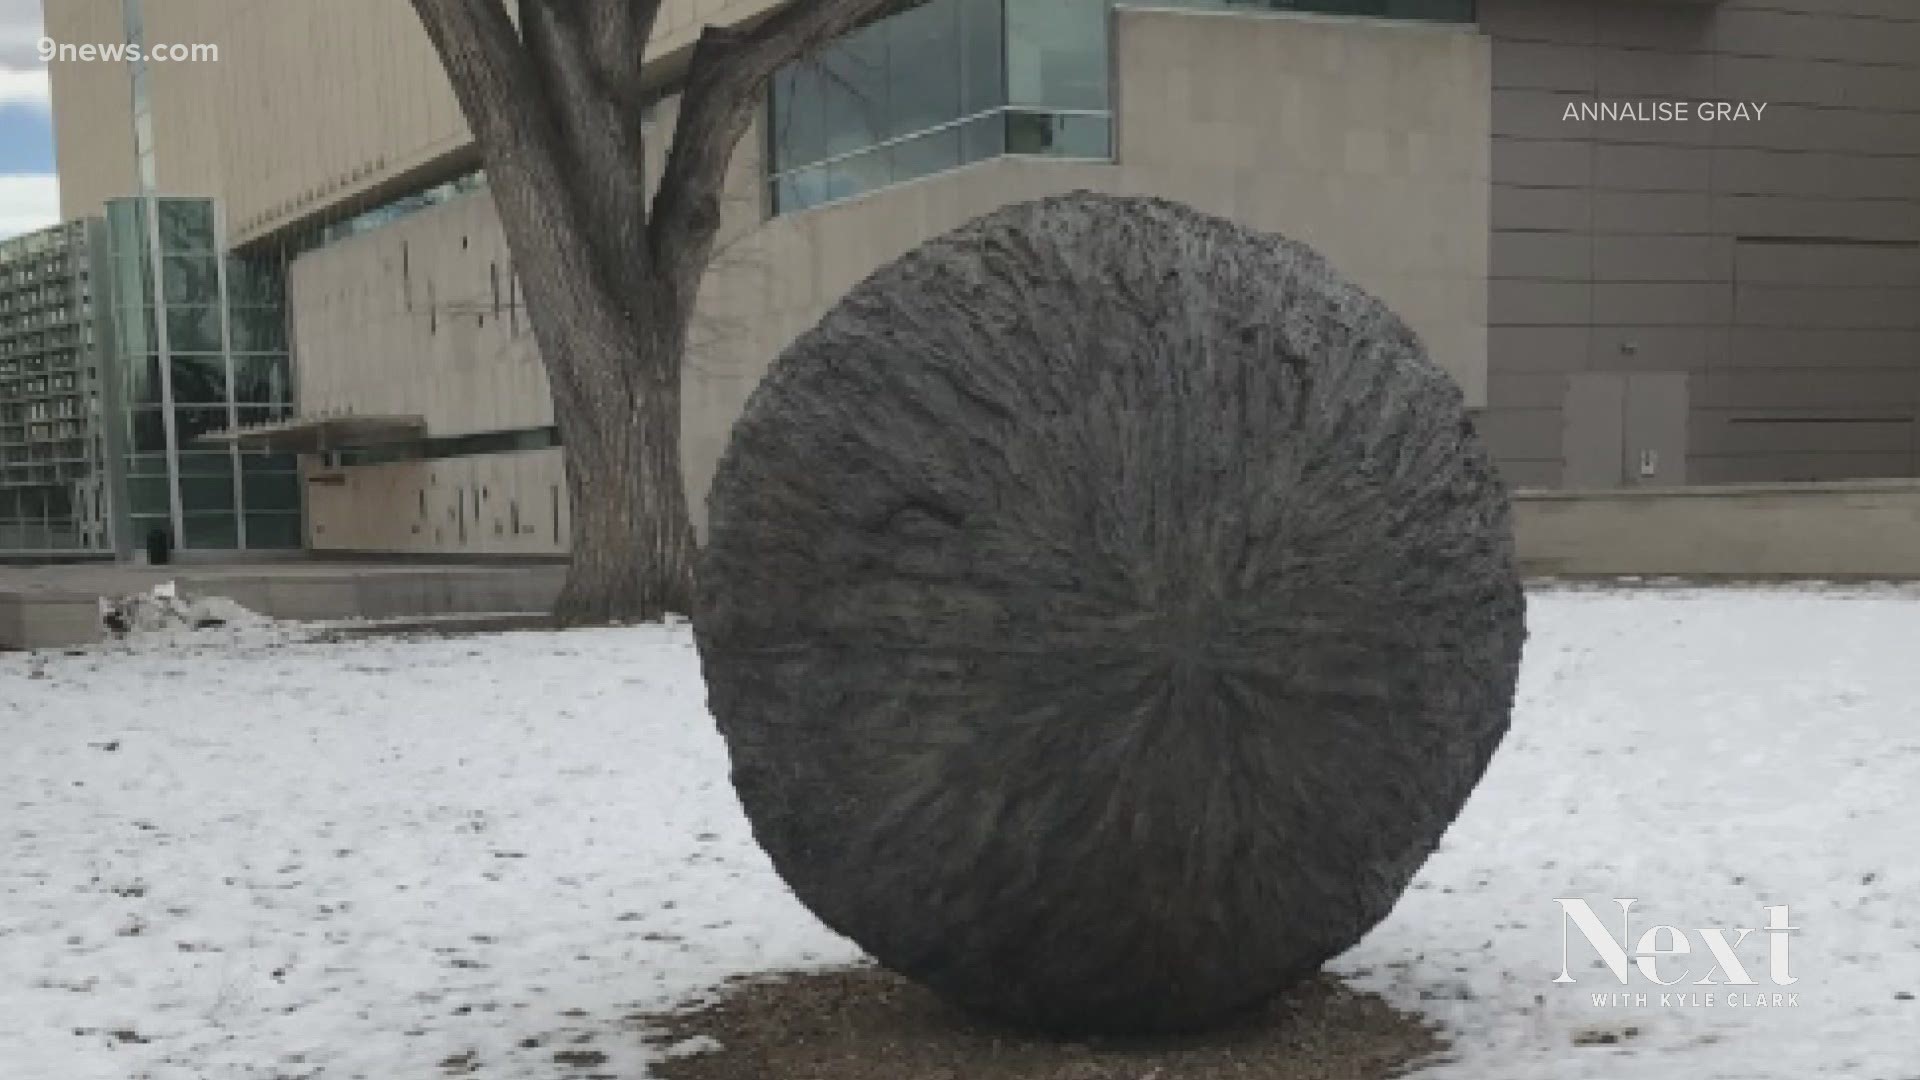 It's bold, artsy and makes noise." Rondure" is part of Denver's Public Art Collection. It's supposed to be a sphere that looks like it's made of tree bark.